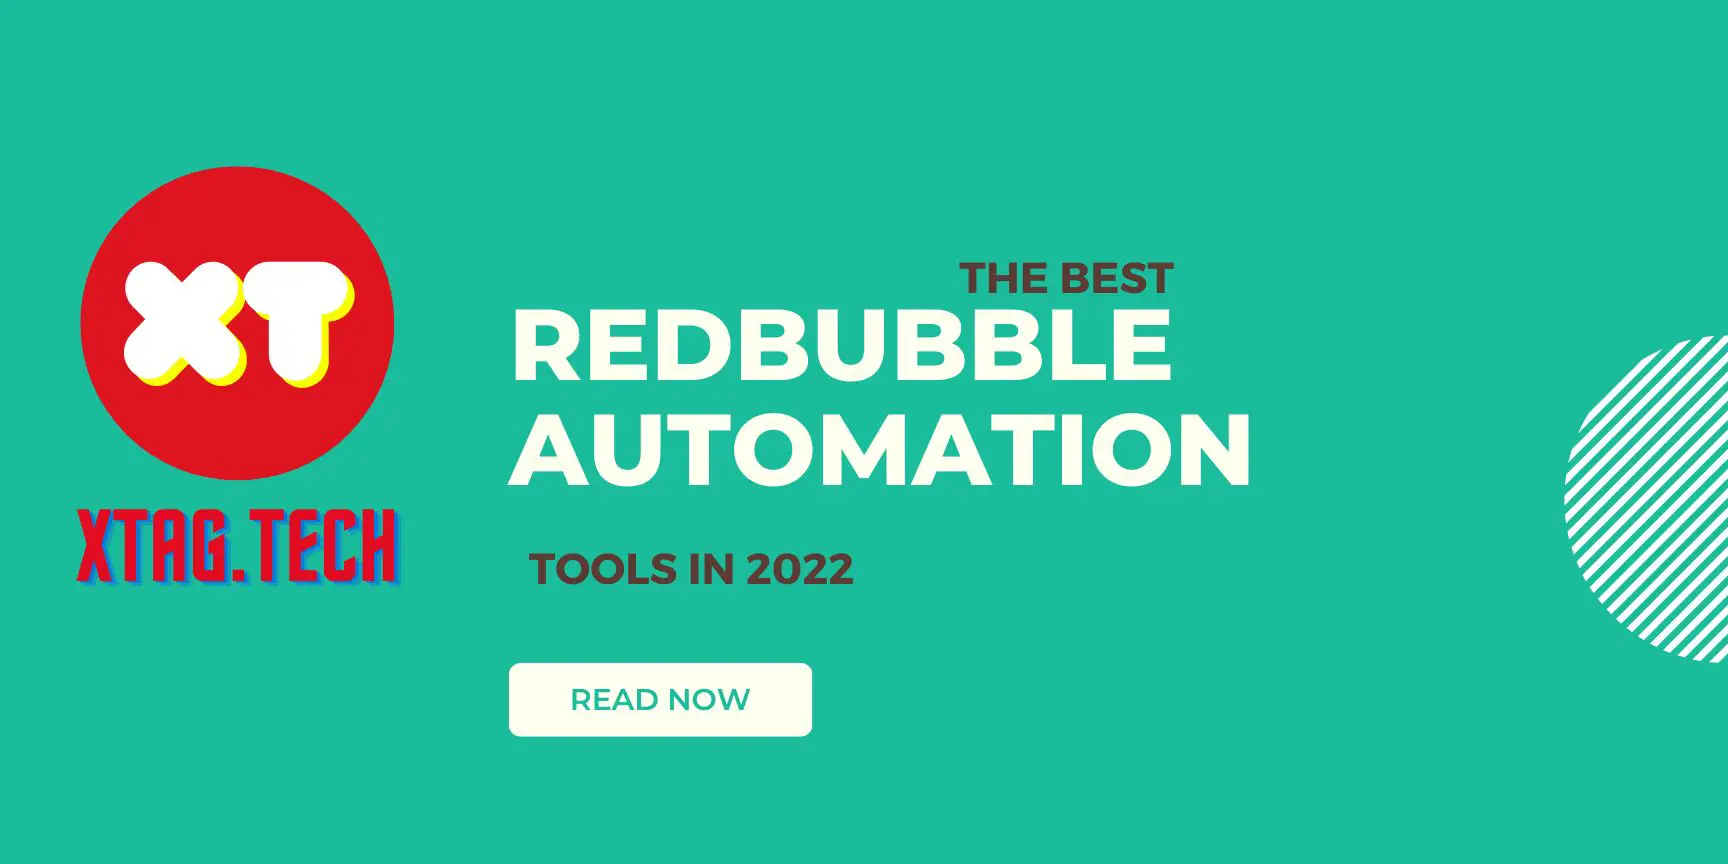 The Best Redbubble Automation Tools In 2022